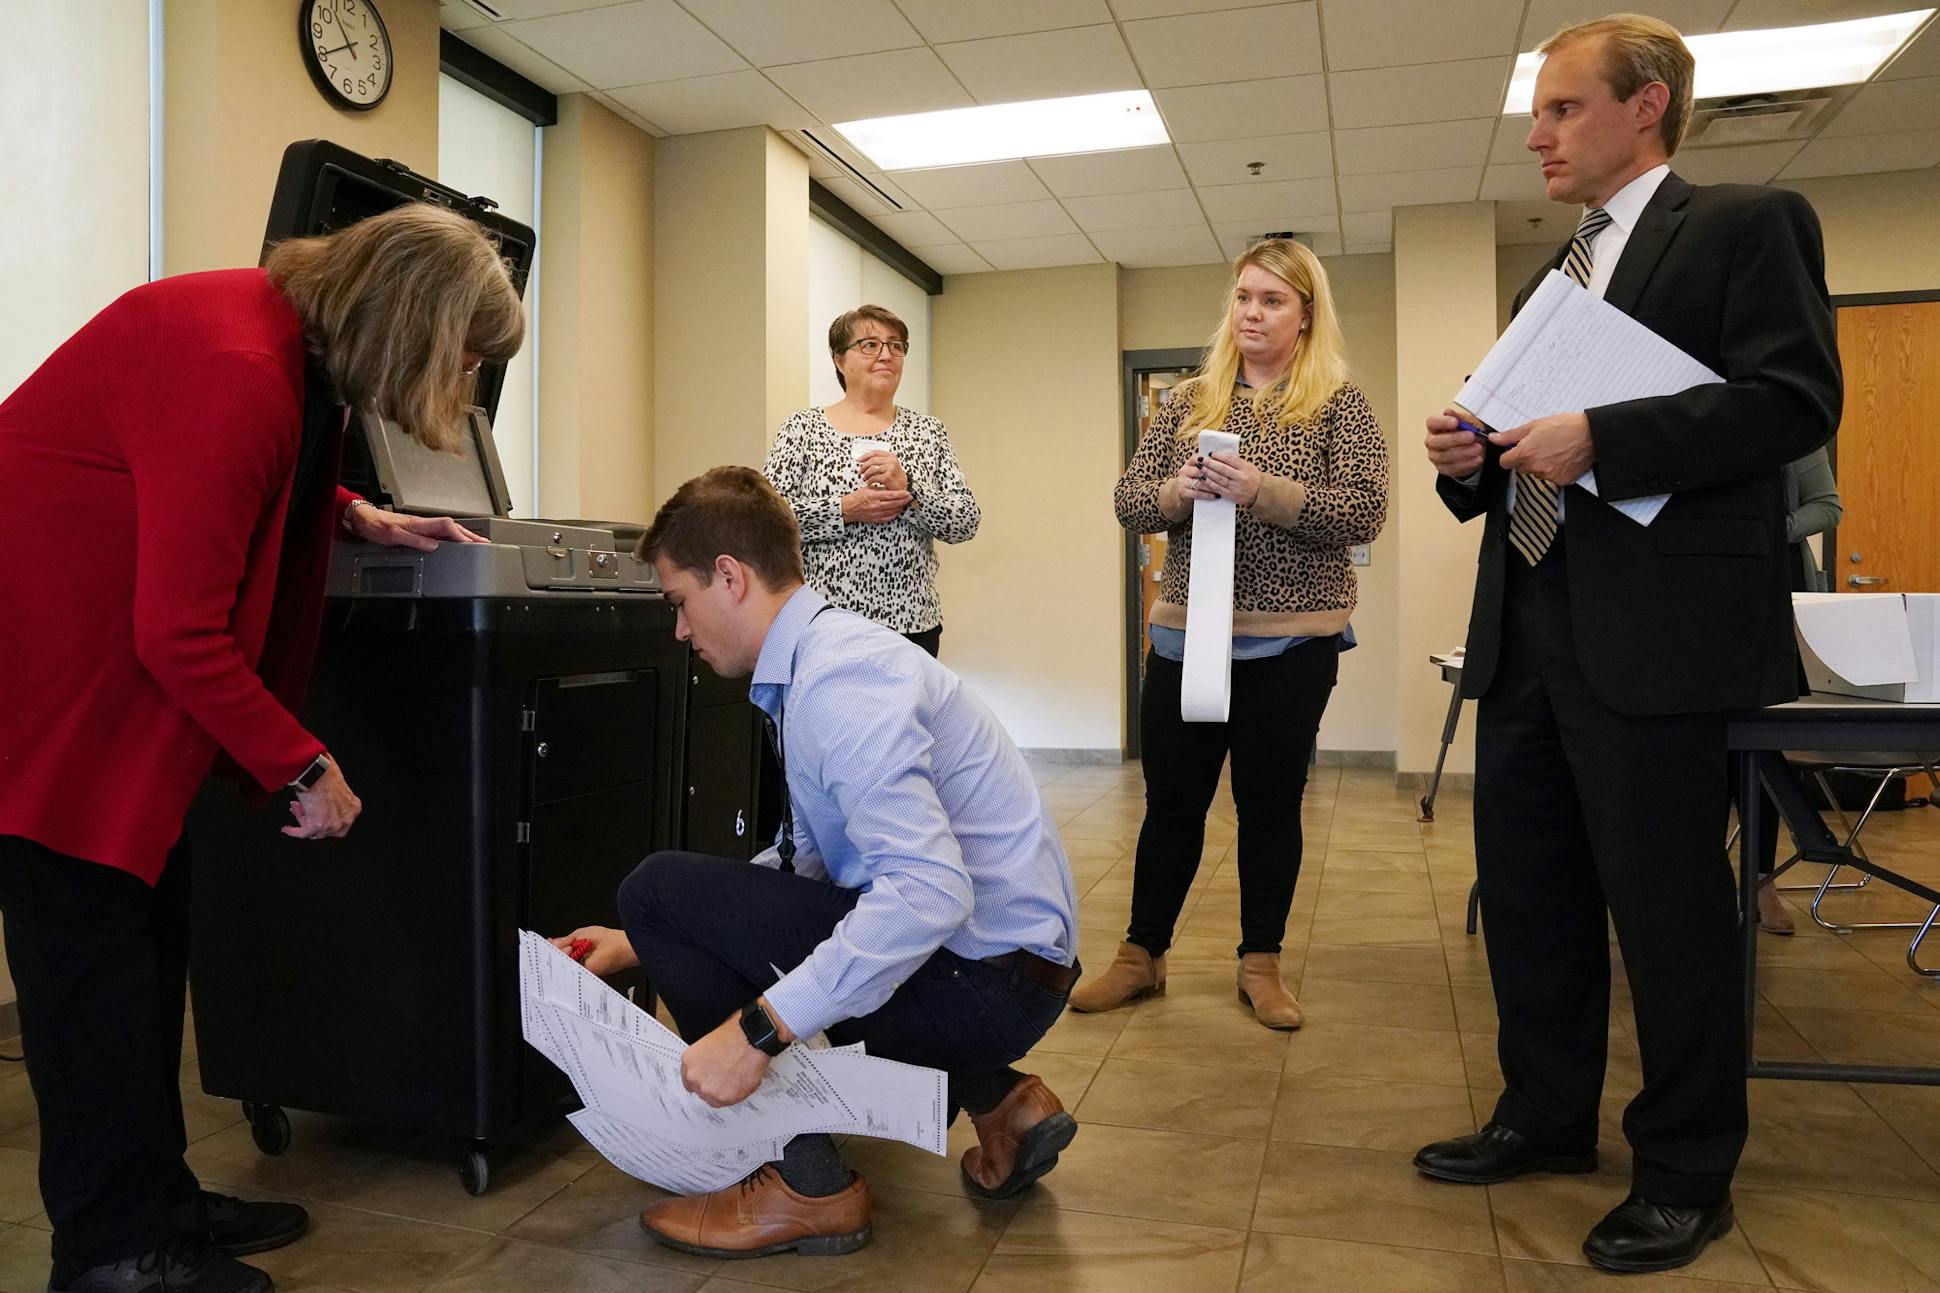 Minnesota Secretary of State Steve Simon, right, watched as elections officials worked on the mandatory public testing of St. Louis Park's voter machines before the 2018 midterm elections.